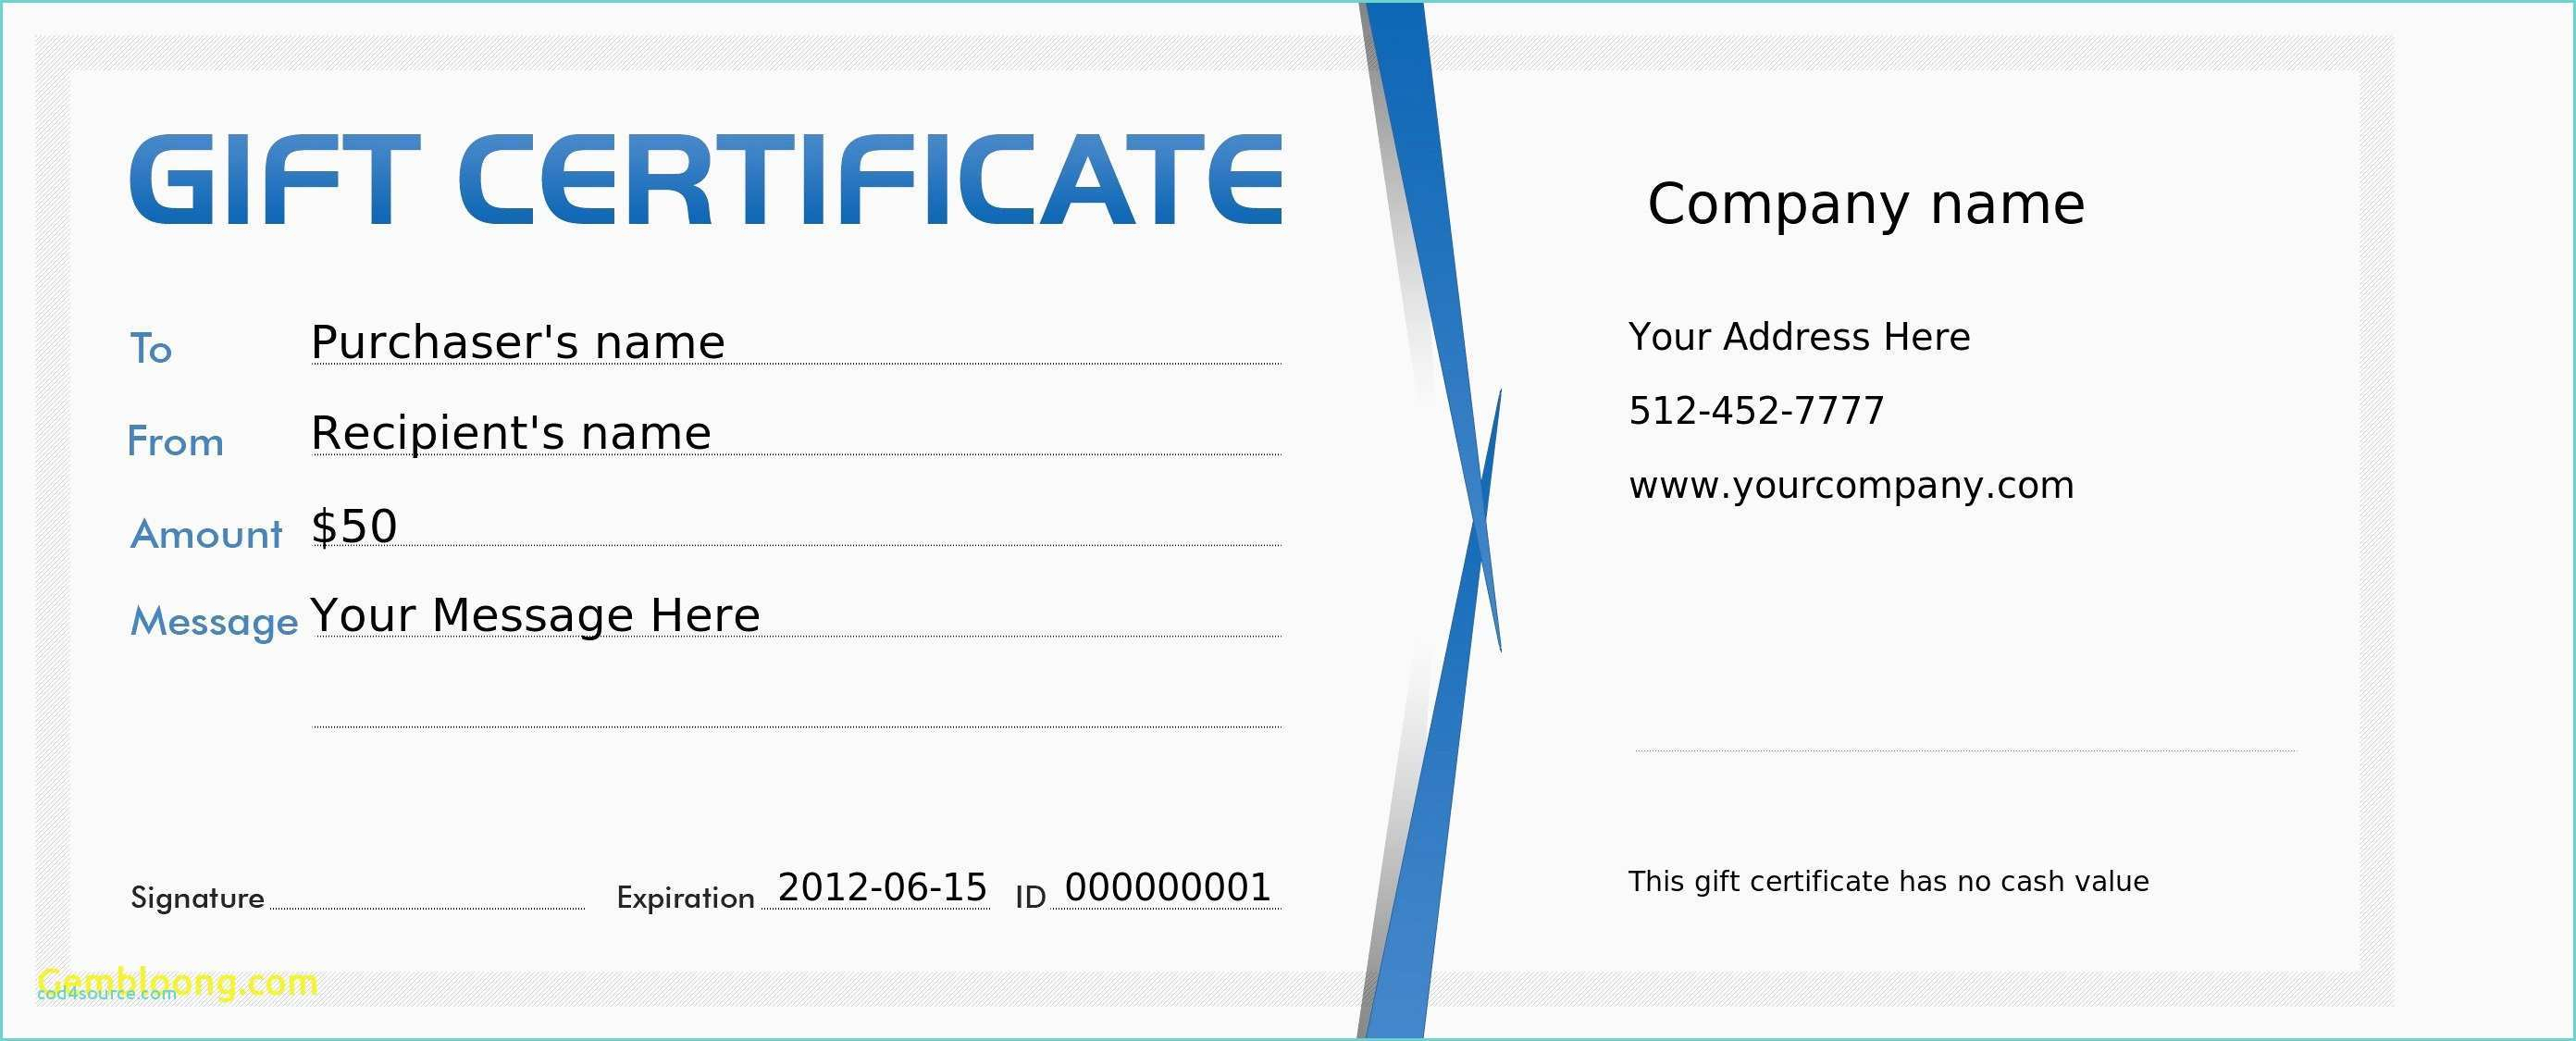 Microsoft Publisher Gift Certificate Template – Teplates For For Gift Certificate Template Publisher